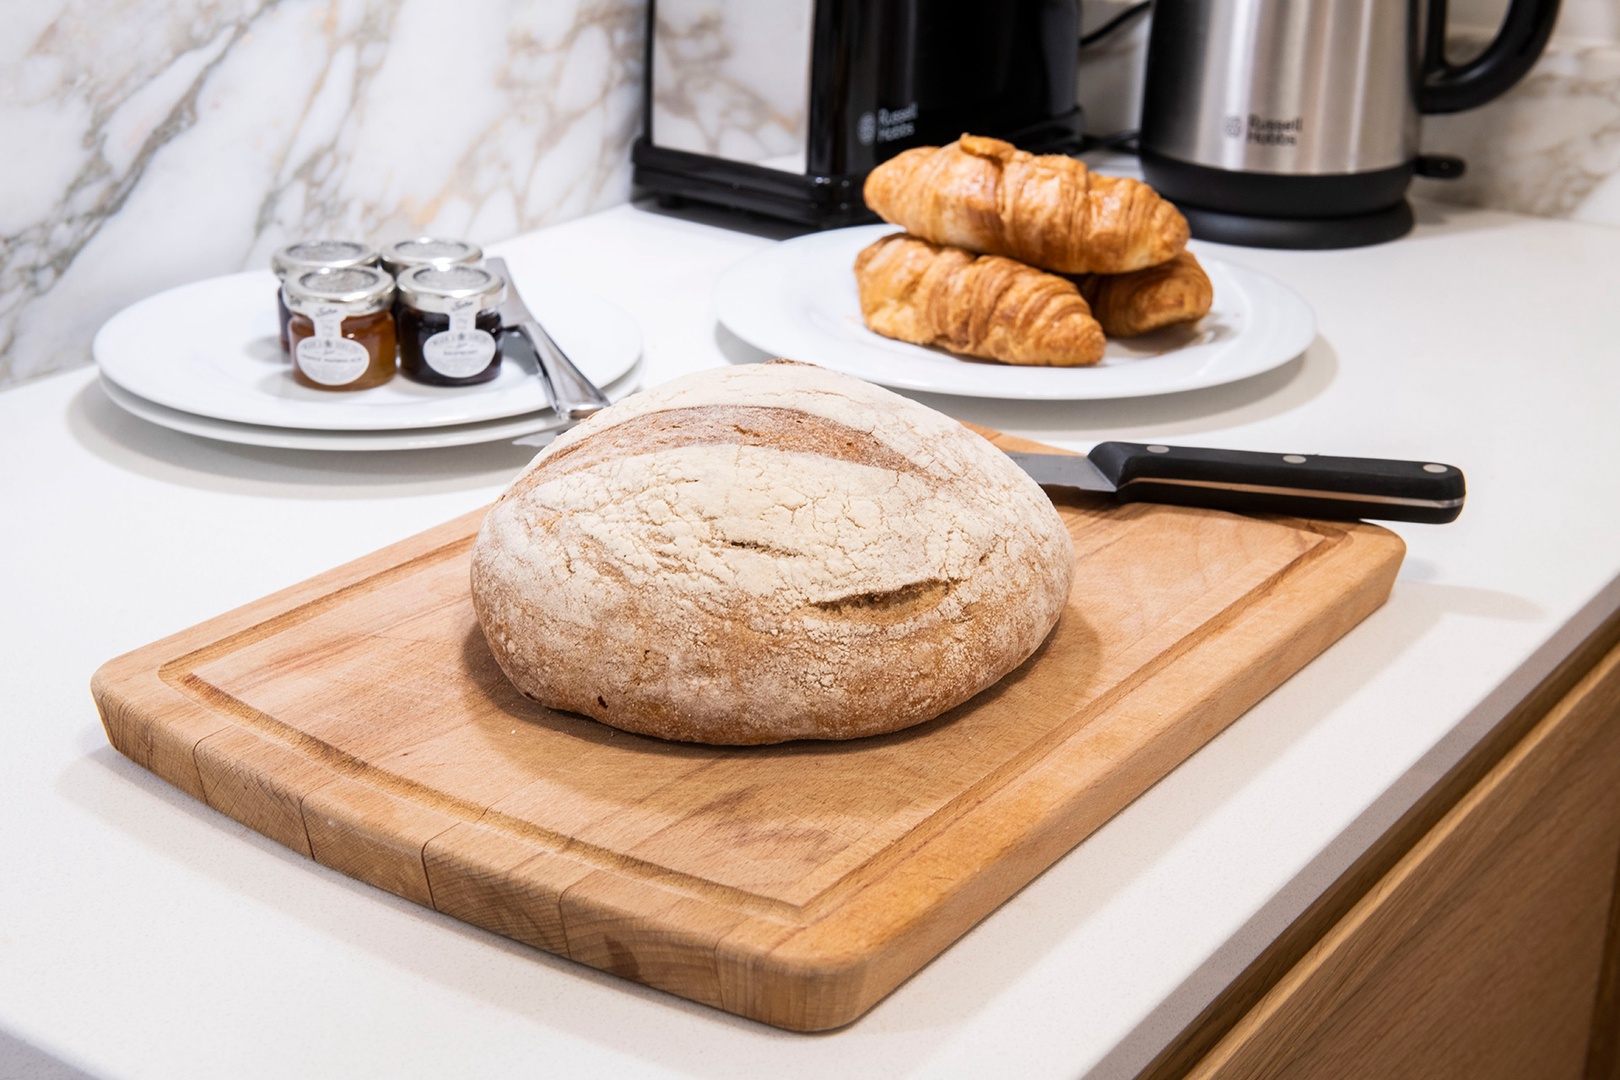 Treat yourself to freshly-baked bread and pastries from a local bakery.